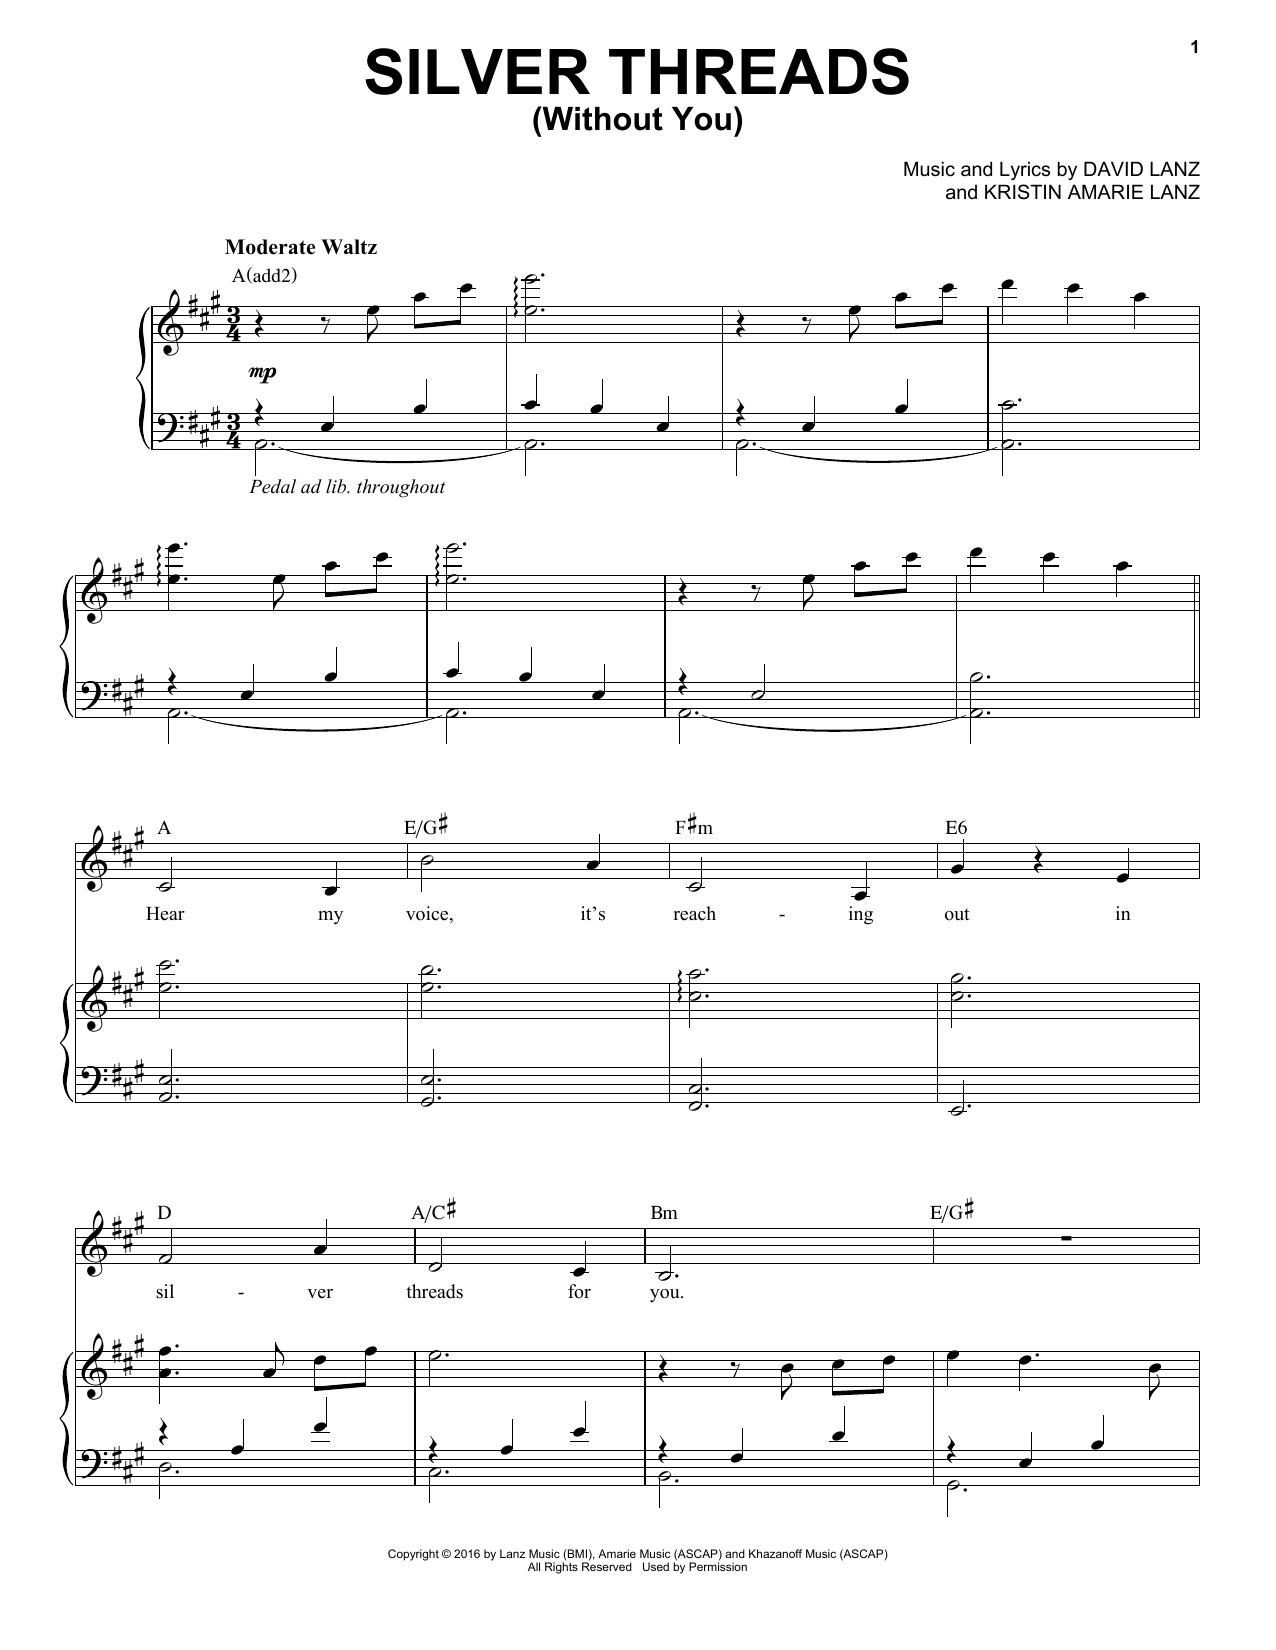 Download David Lanz & Kristin Amarie Silver Threads (Without You) Sheet Music